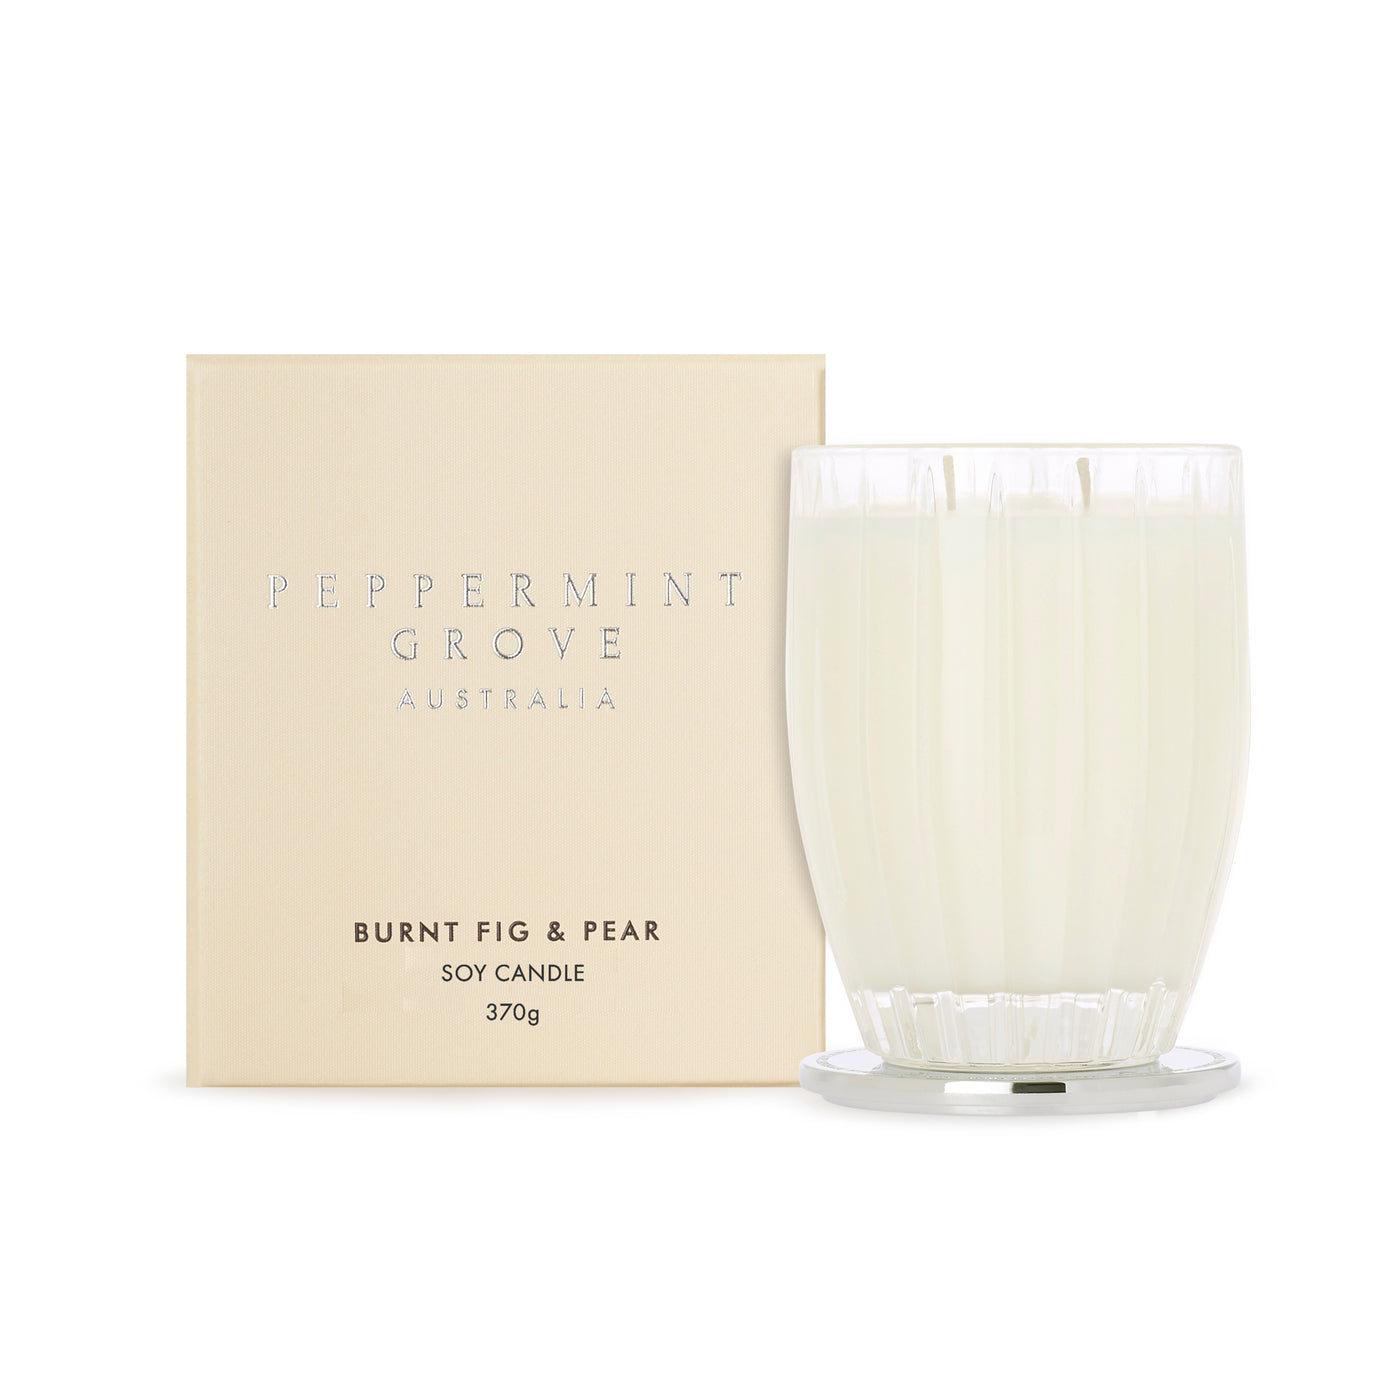 Burnt Fig & Pear Soy Candle- Peppermint Grove